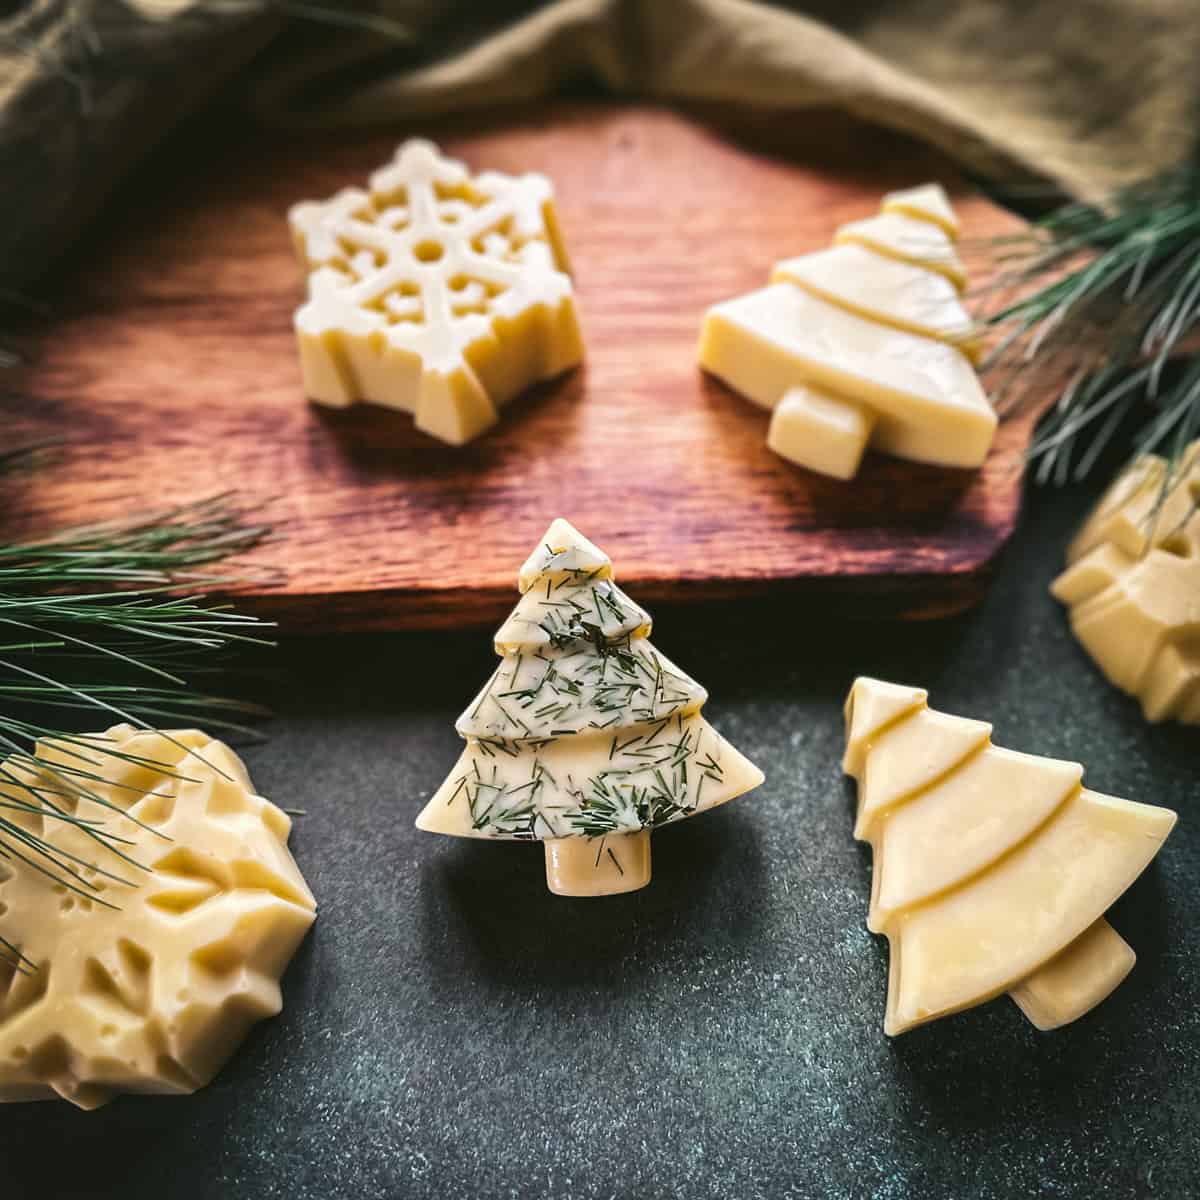 Christmas tree and snowflake shaped lotion bars, cream colored. One tree has pine needles sprinkled on it, on a wood cutting board and a dark green surface, with pine needles surrounding.